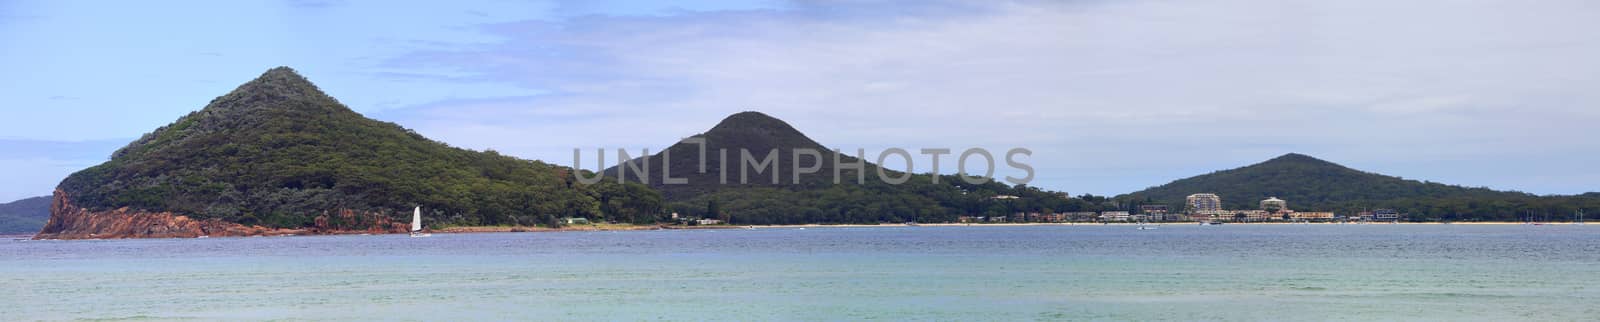 Mt Tomaree, Stephens Peak, Quarry Hill at Port Stephens behind Shoal Bay from across the waters.  Some of the old gun emplacements can be seen when Tomaree was used as a fort and you can only just see one of the lookouts at the summit.